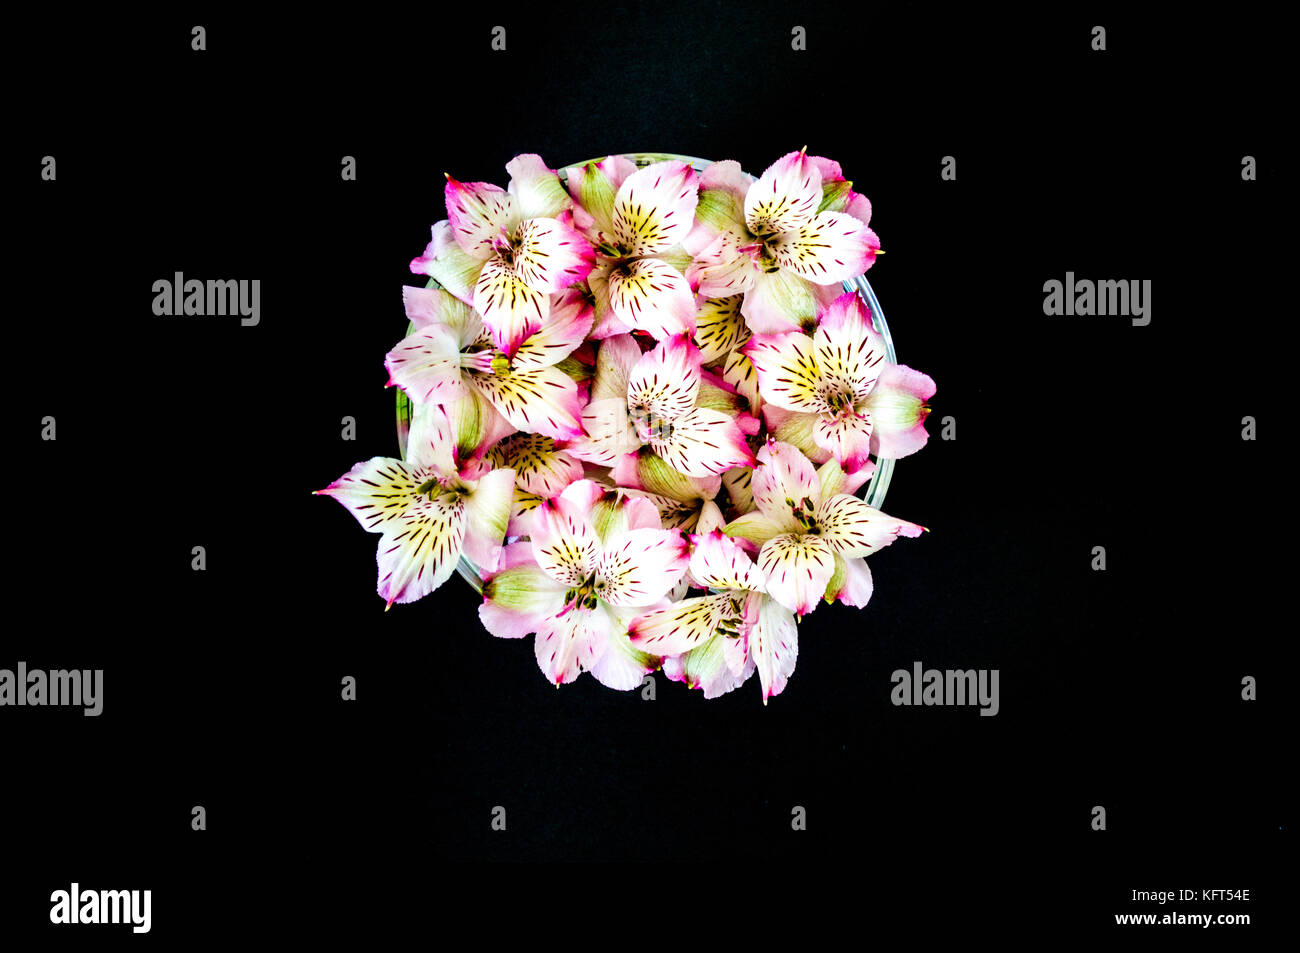 bowl of  colorful alstromeria flowers isolated on black viewed from above Stock Photo